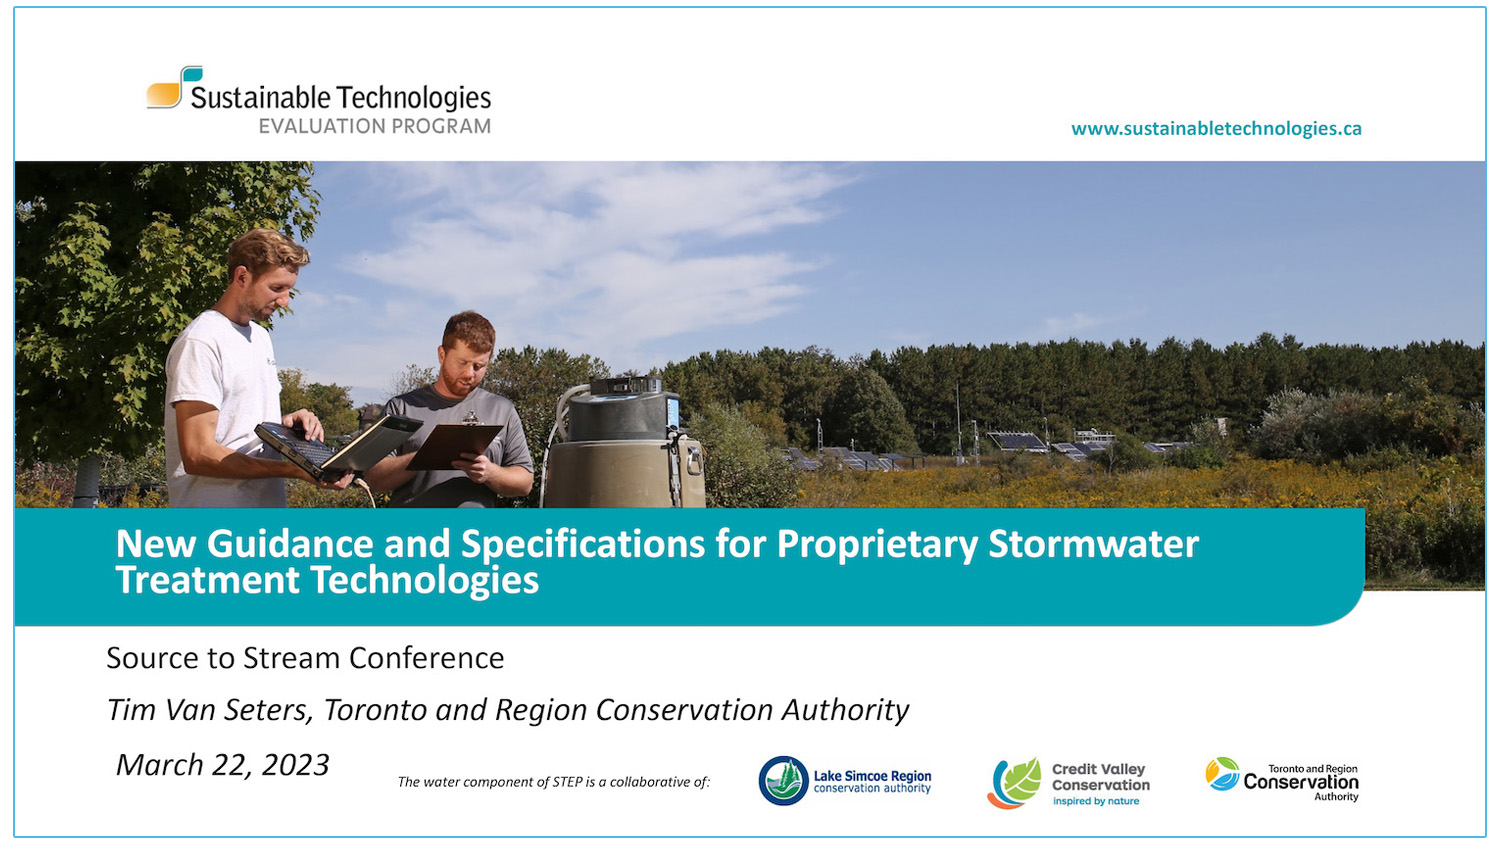 New Guidance and Specifications for Manufactured Stormwater Treatment Technologies - Presenters - Tim Van Seters, Toronto and Region Conservation Authority - Shad Hussain City of Toronto